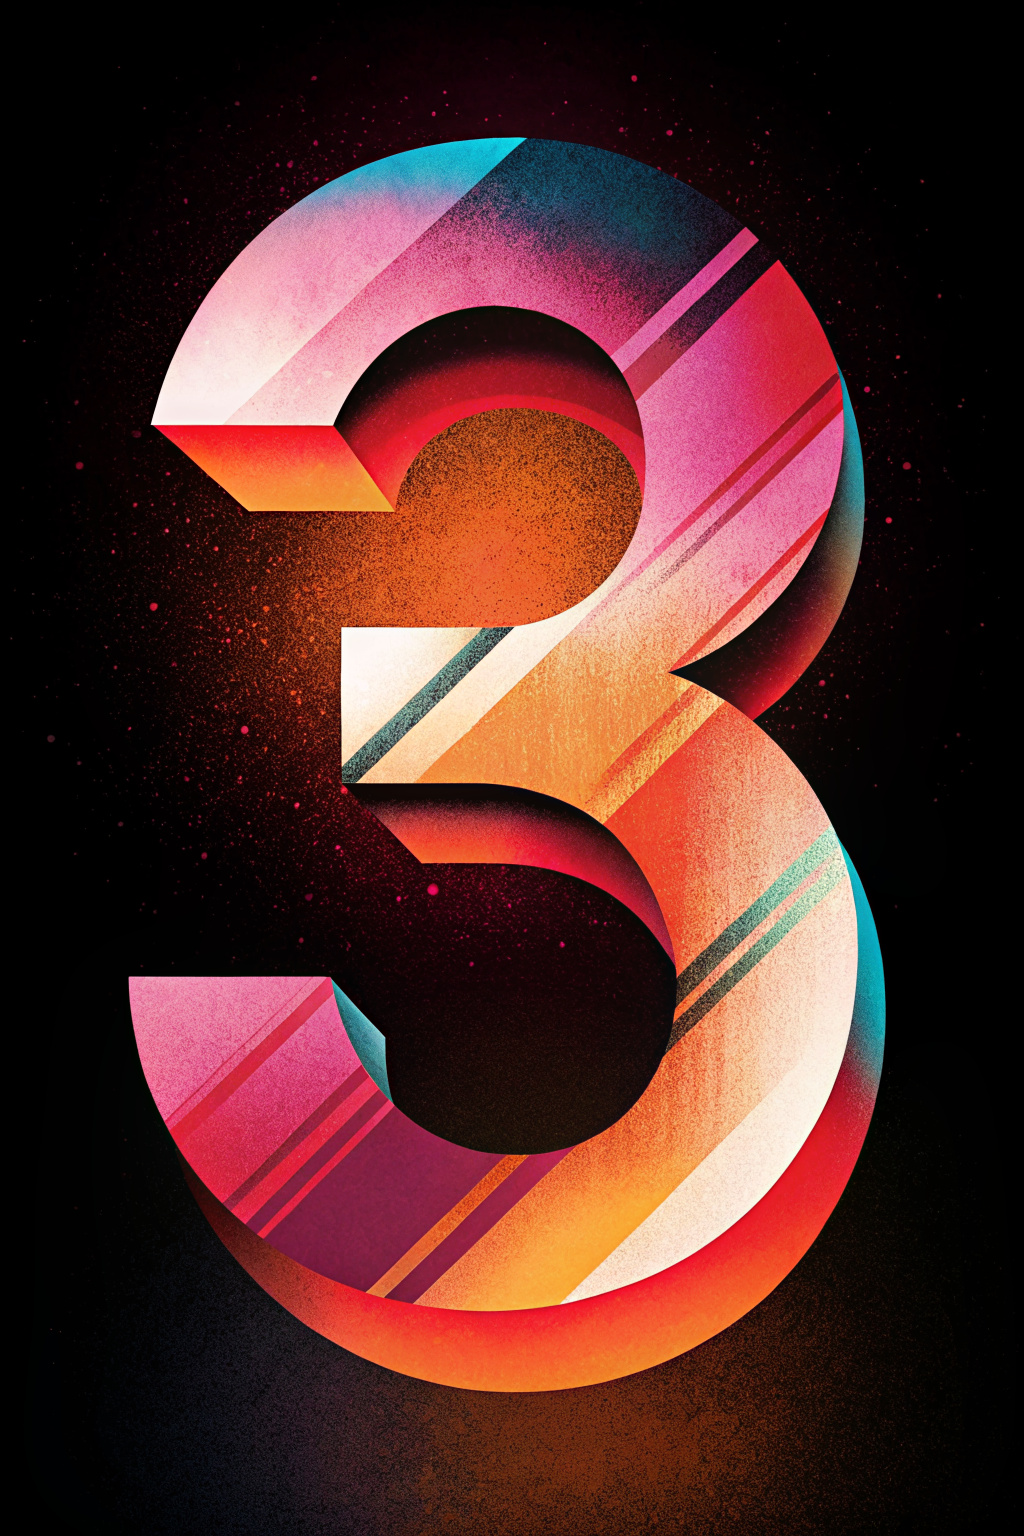 The number "3" is written in white, pink and orange paint on the red black background. Vector illustration style with flat design. The numbers appear as if they were painted by hand with brush strokes. In front of them there's an abstract square shape with black lines. A modern graphic logo for use on web pages or other digital media.